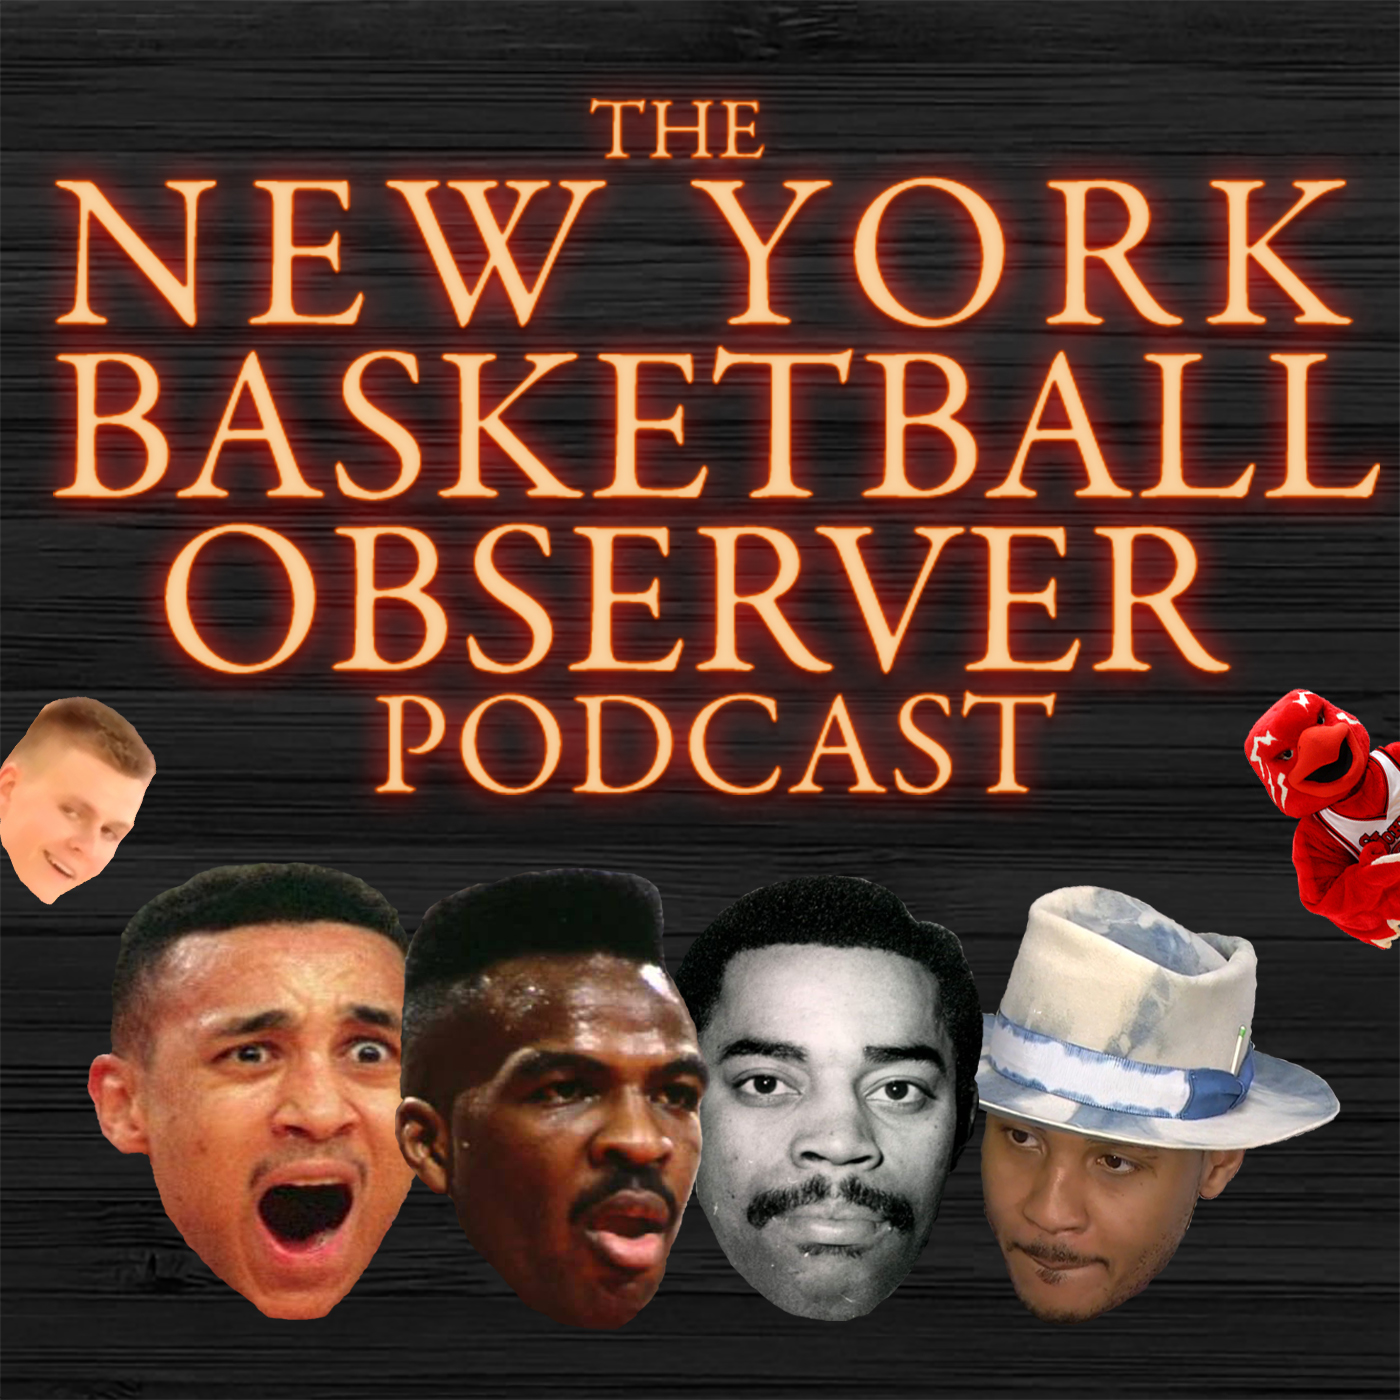 EPISODE 2 - What Each Knick Should Improve On This Summer (Part 1)